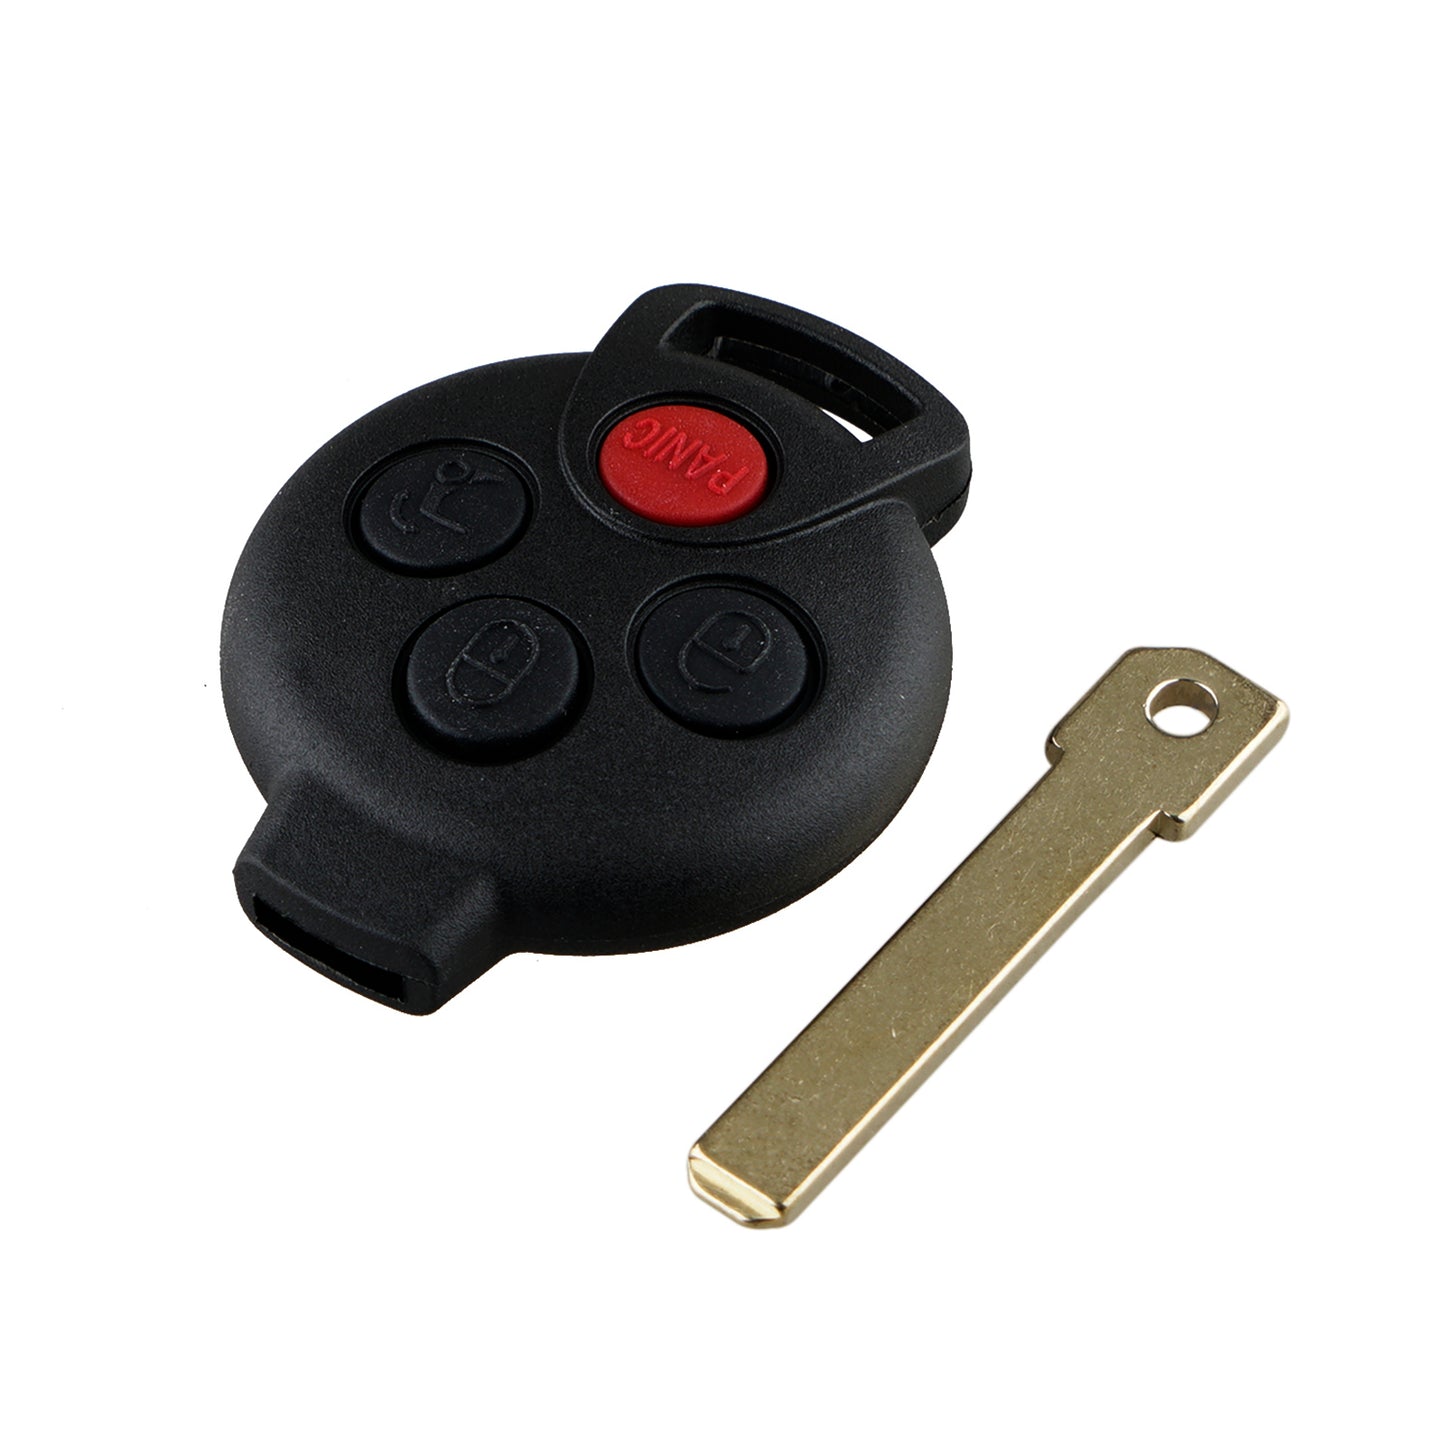 4 Buttons 315MHz Remote Control Key Fob PCF7941 Chip for Mercedes Benz Smart Fortwo 2005-2016 KR55WK45144 SKU : J076